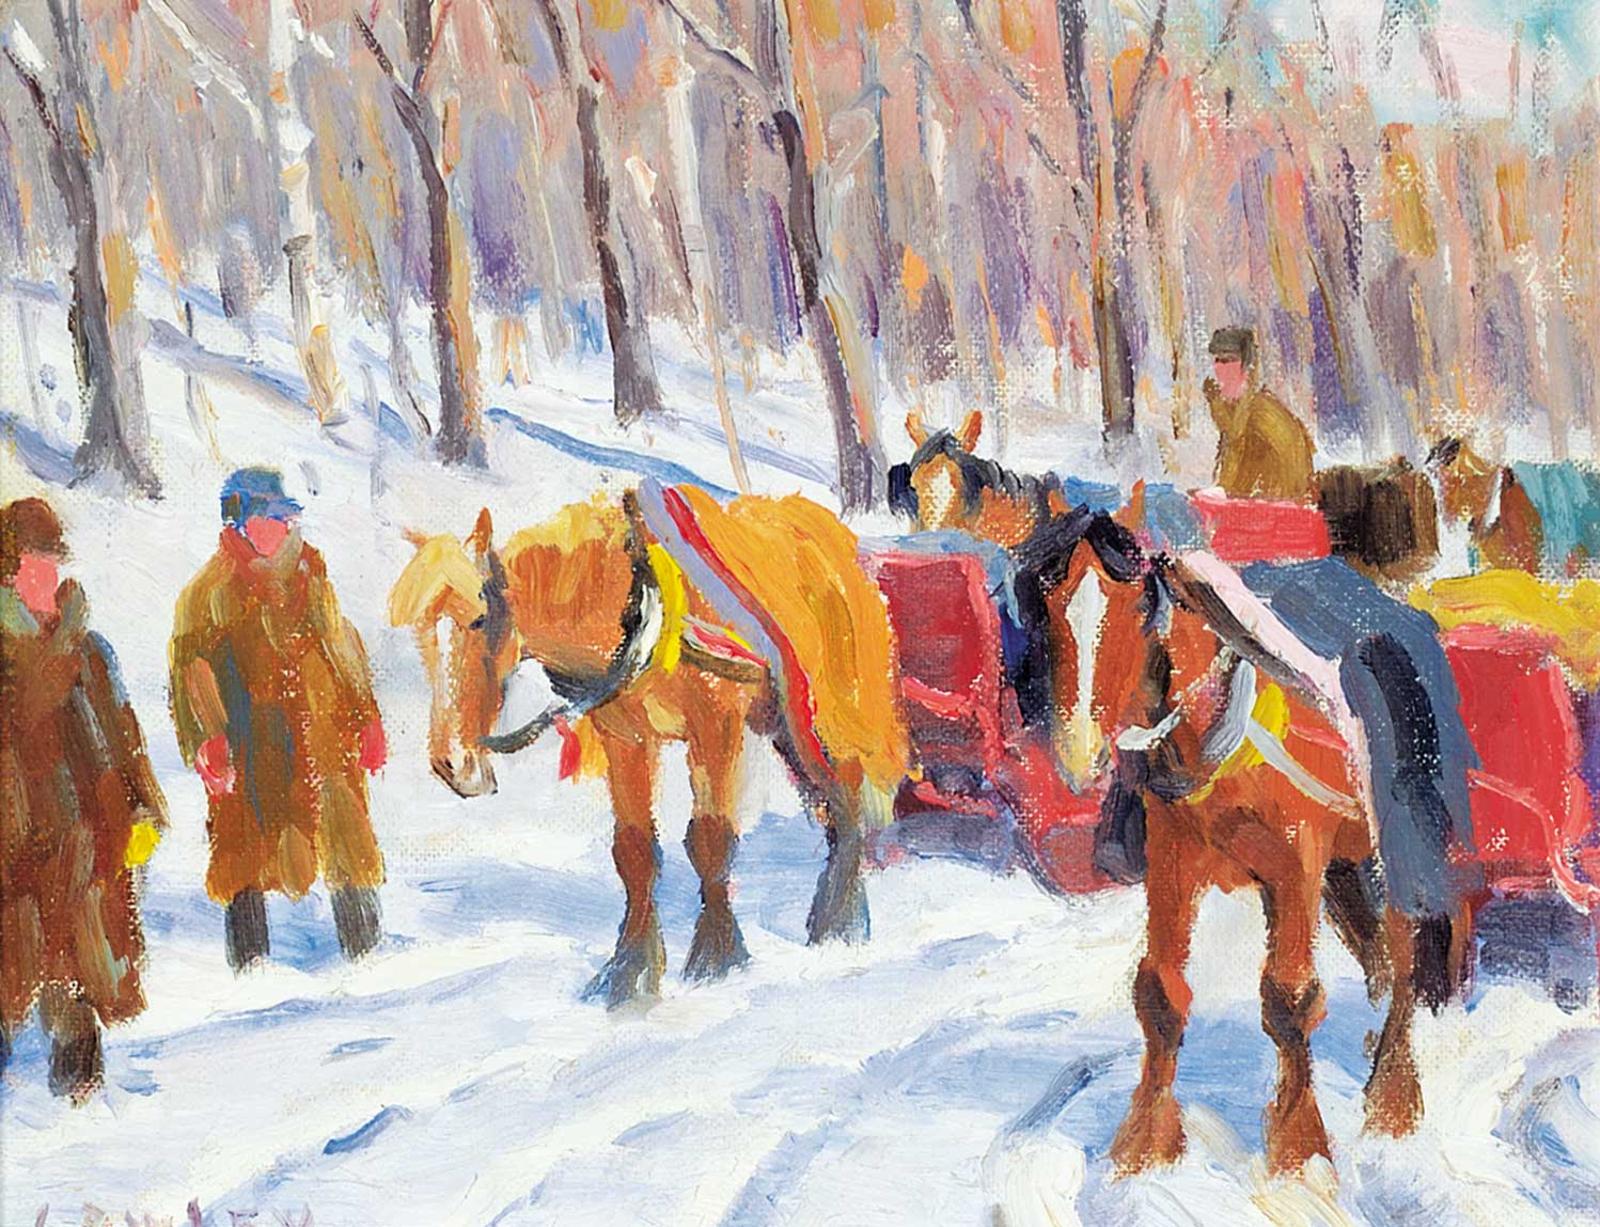 John Douglas Lawley (1906-1971) - Untitled - Working Horses in the Snow, Parc du Montreal